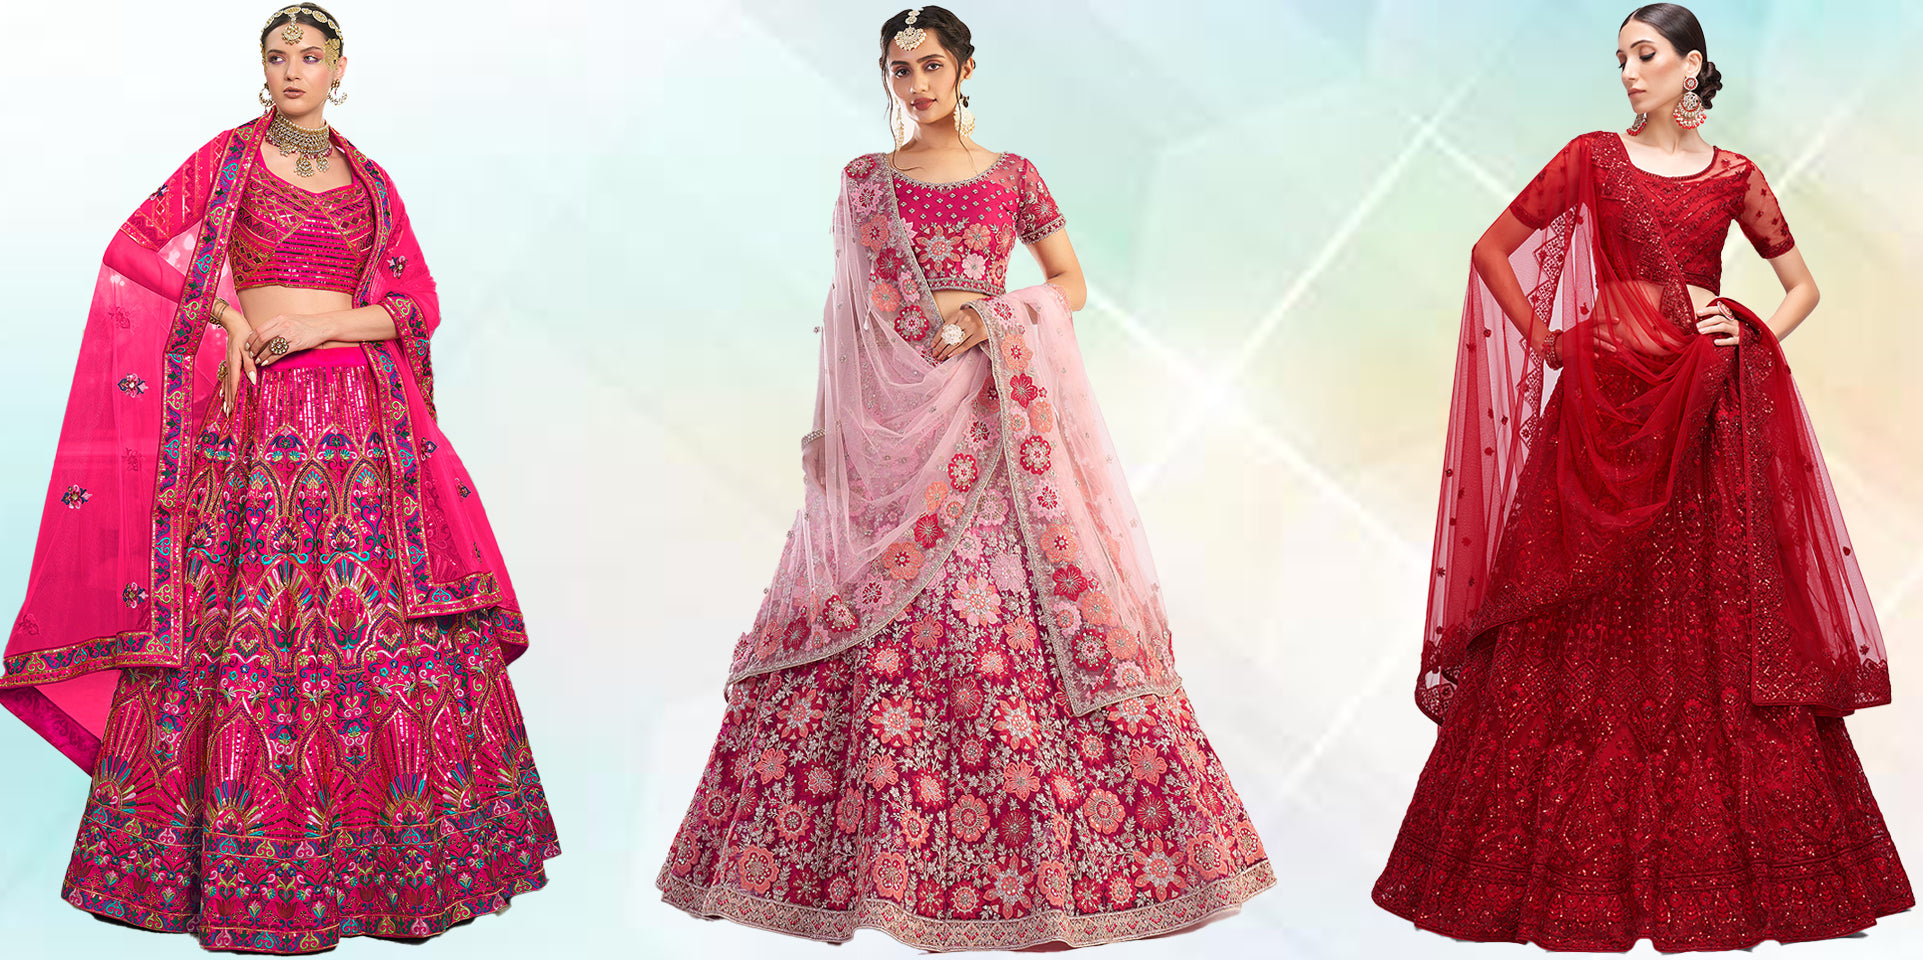 What are the Things to Keep in Mind Before Buying a Wedding Lehenga Choli?